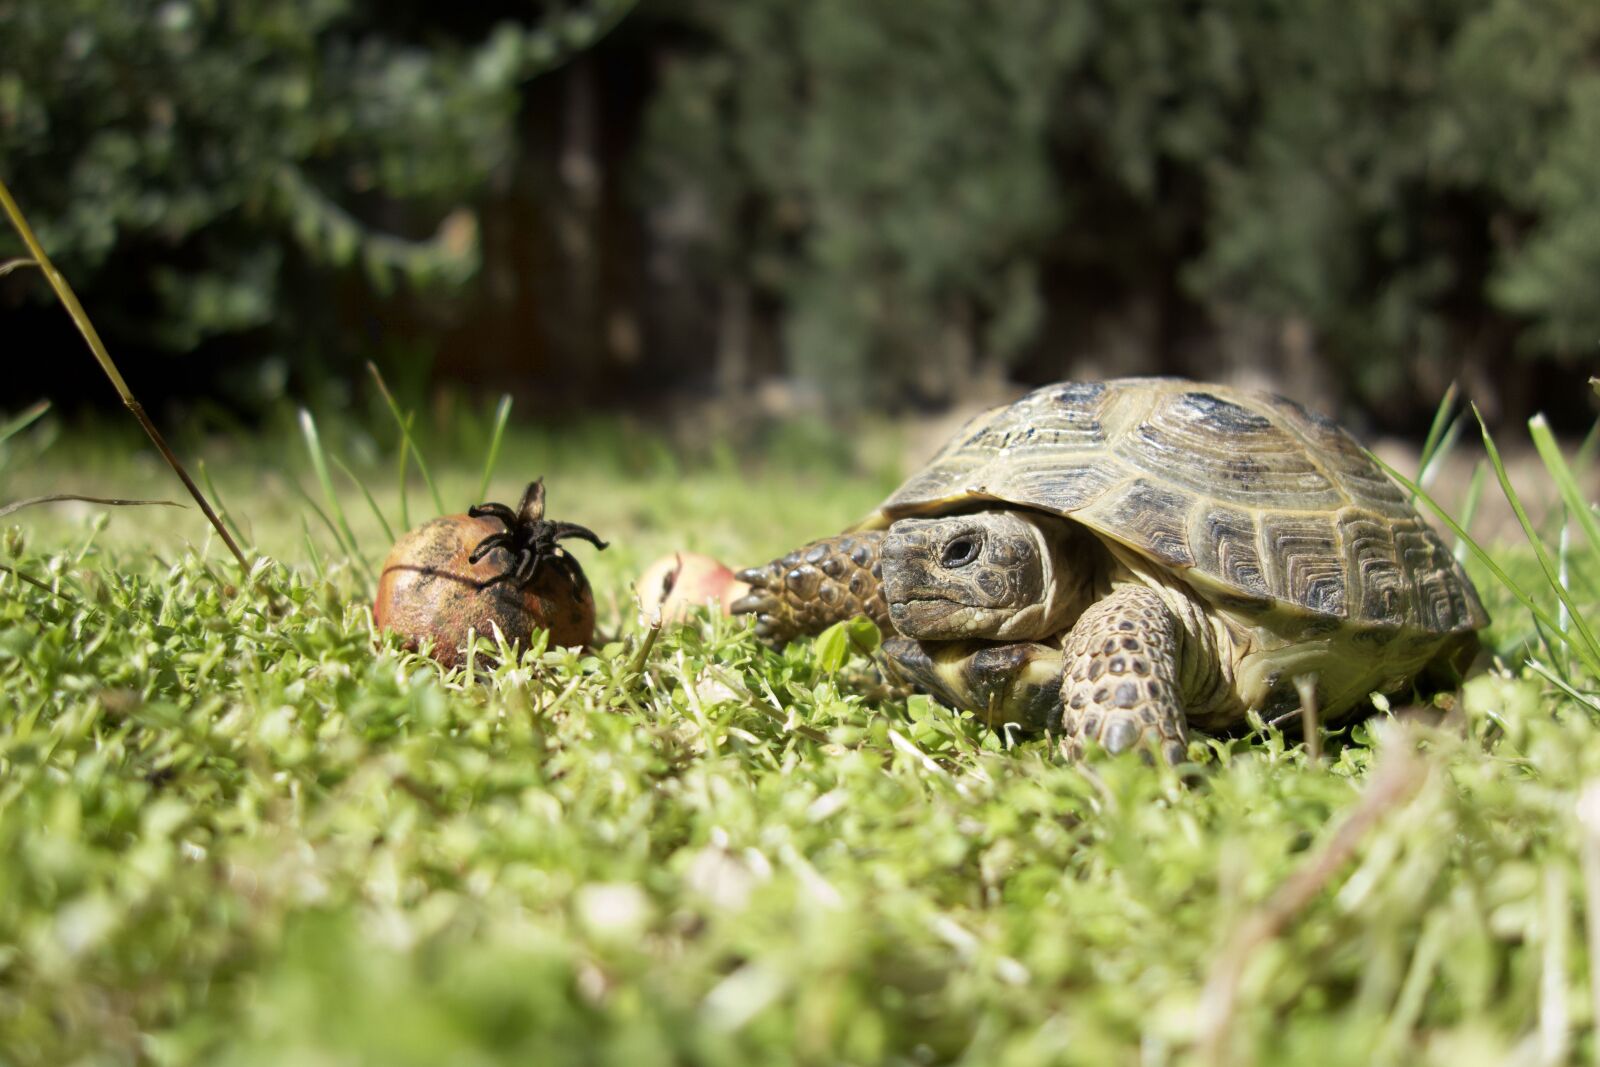 Sony Cyber-shot DSC-RX100 sample photo. Turtle, grass, animals photography